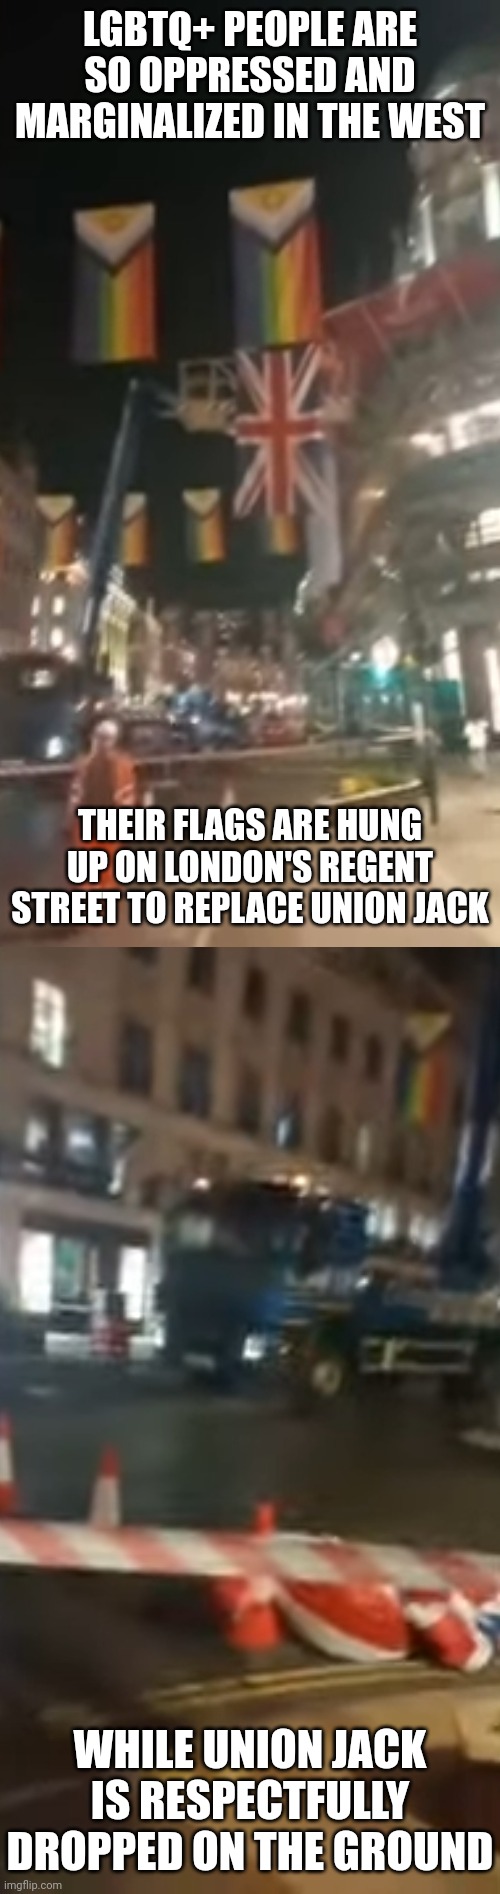 When a nation disrespect its own flag in favor of the lgbt pride flag, you have no reason to claim lgbt people are "oppressed" | LGBTQ+ PEOPLE ARE SO OPPRESSED AND MARGINALIZED IN THE WEST; THEIR FLAGS ARE HUNG UP ON LONDON'S REGENT STREET TO REPLACE UNION JACK; WHILE UNION JACK IS RESPECTFULLY DROPPED ON THE GROUND | image tagged in lgbtq,pride month,britain,london,england,liberal logic | made w/ Imgflip meme maker